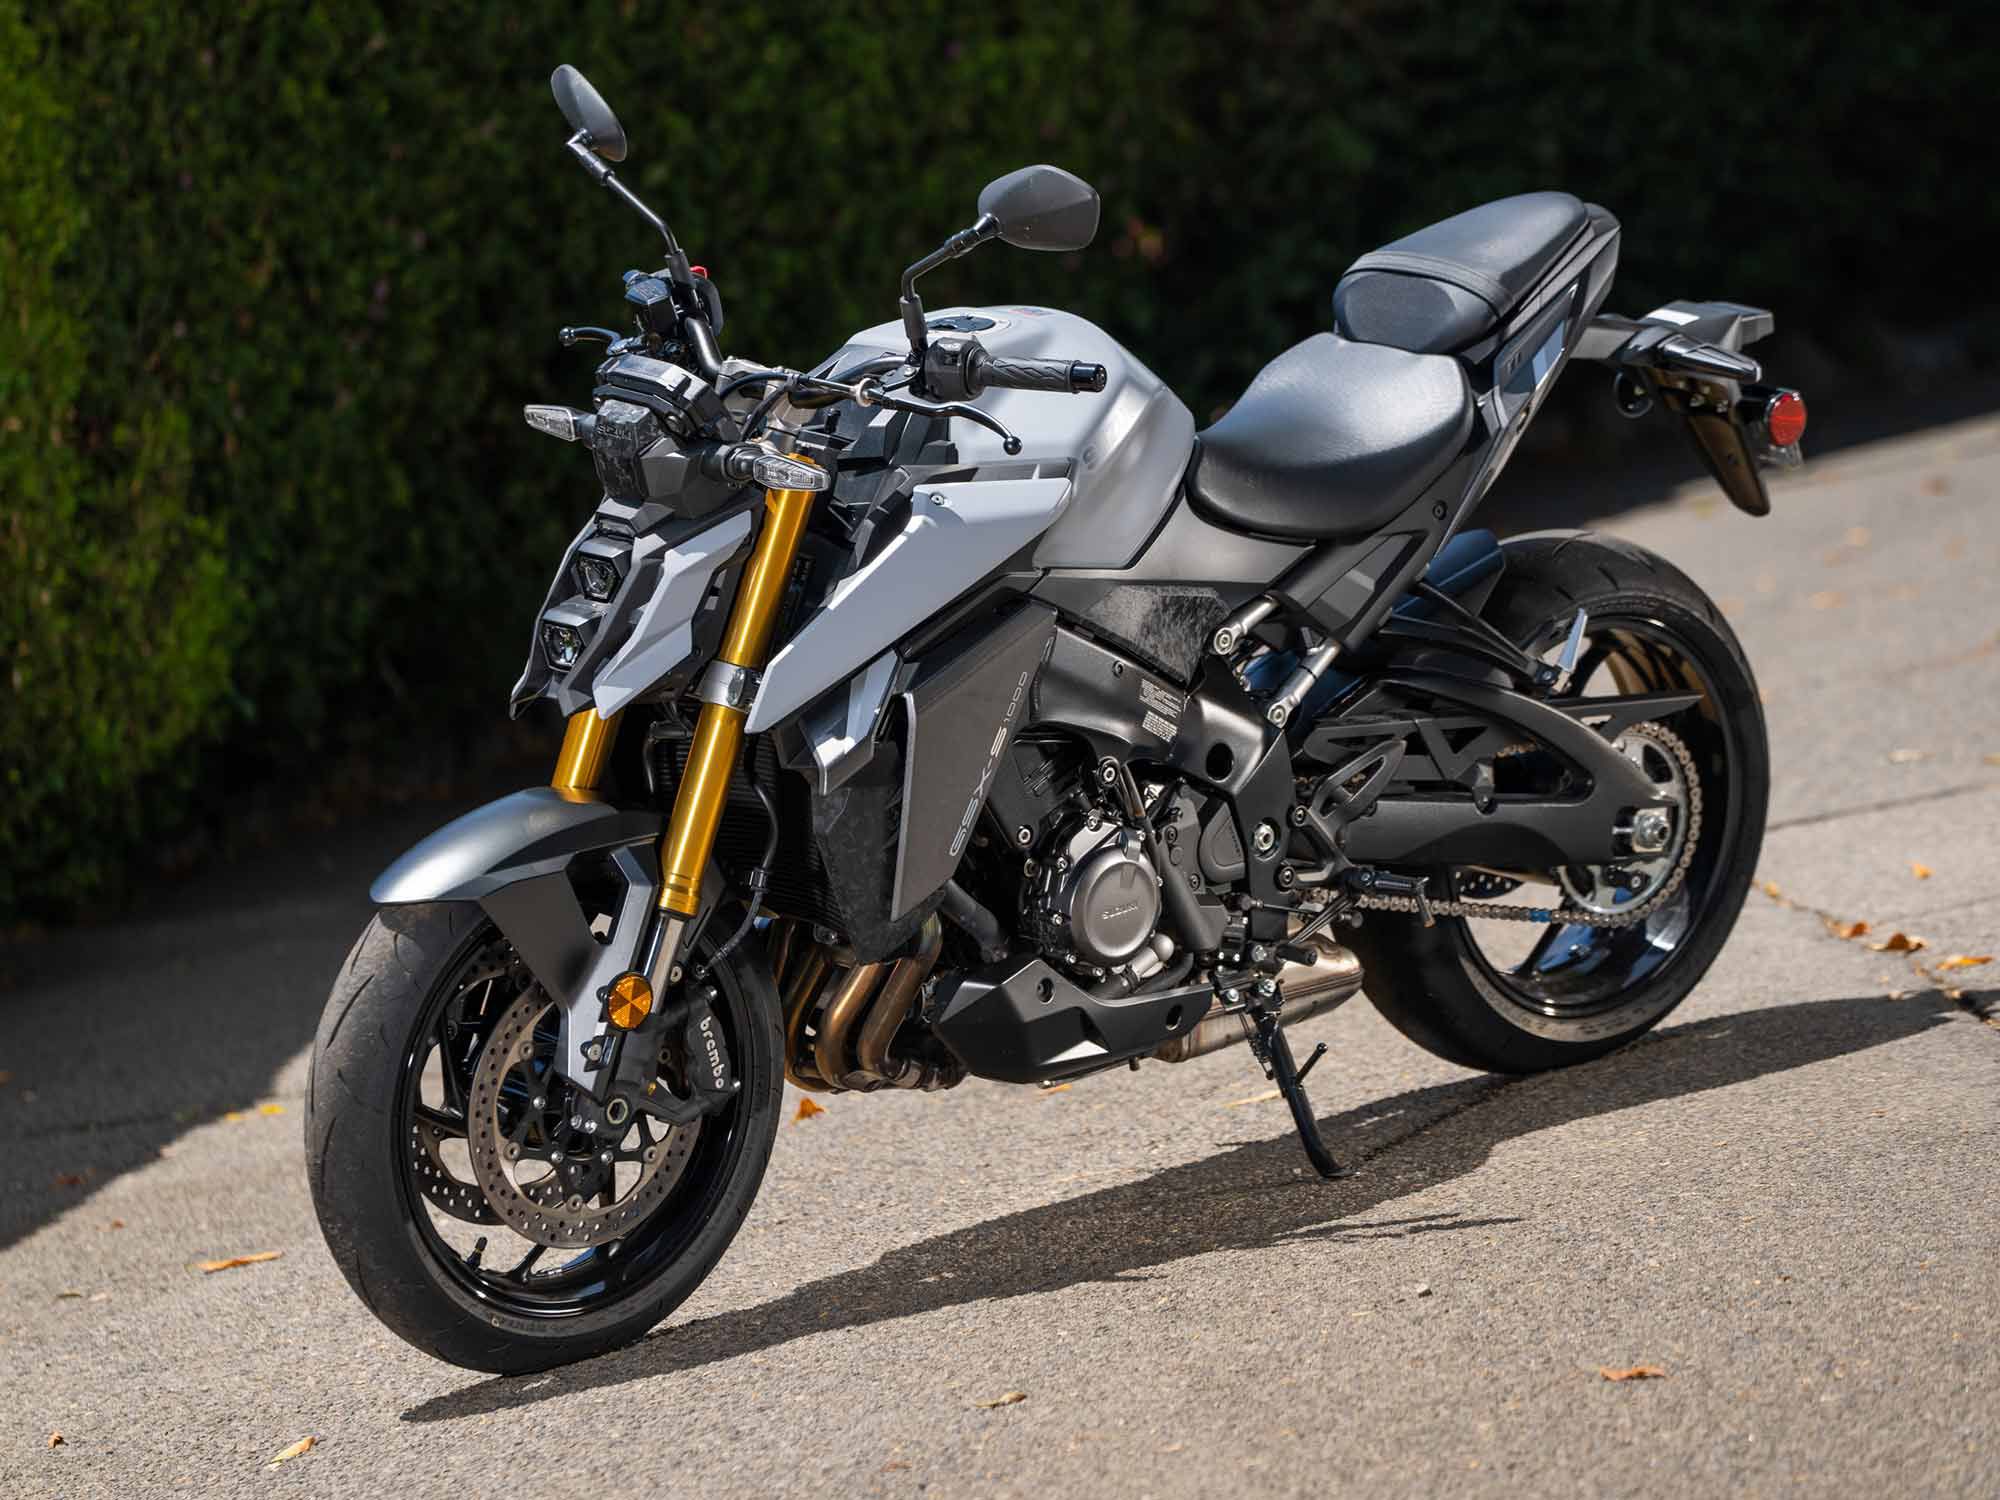 Suzuki gives its 2022 GSX-S1000 naked bike a much needed face-lift. It’s a big improvement aesthetically over the previous model.